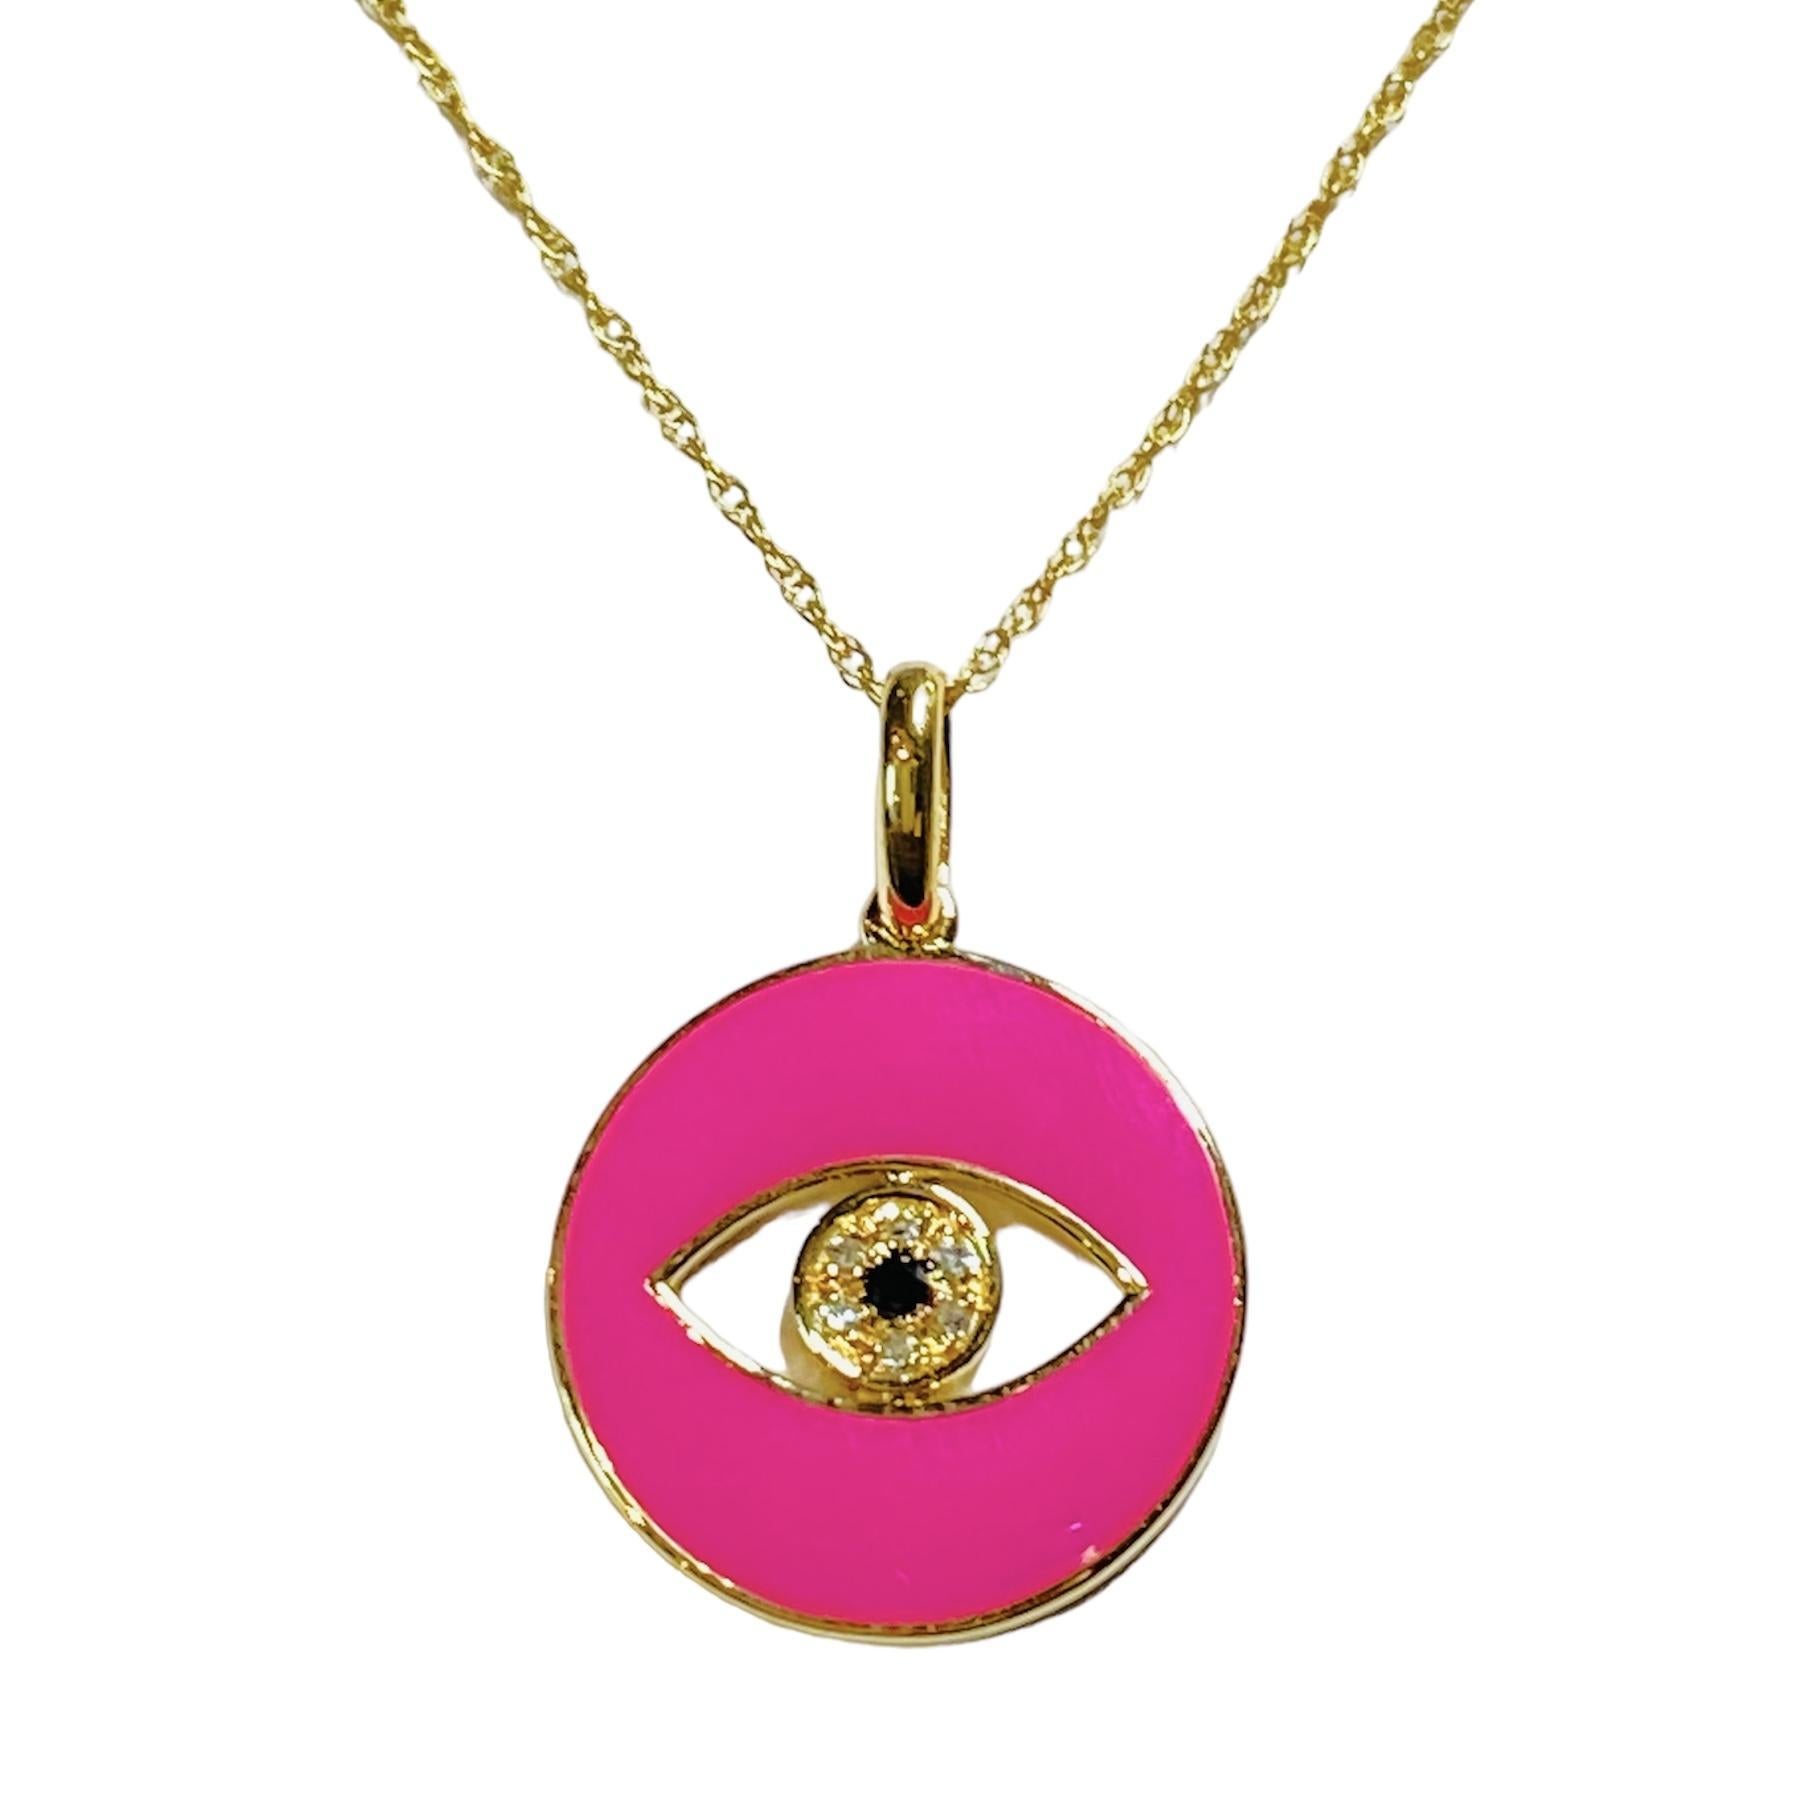 Solid 14K Yellow Gold Evil Eye Diamond Necklace 
Fall in love with this Hot Pink Enamel Evil Eye high-polish pendant with natural diamonds.
The Evil Eye is an symbol of spiritual protection and good health. 

14K Yellow Gold 


Hot Pink 
0.05 total